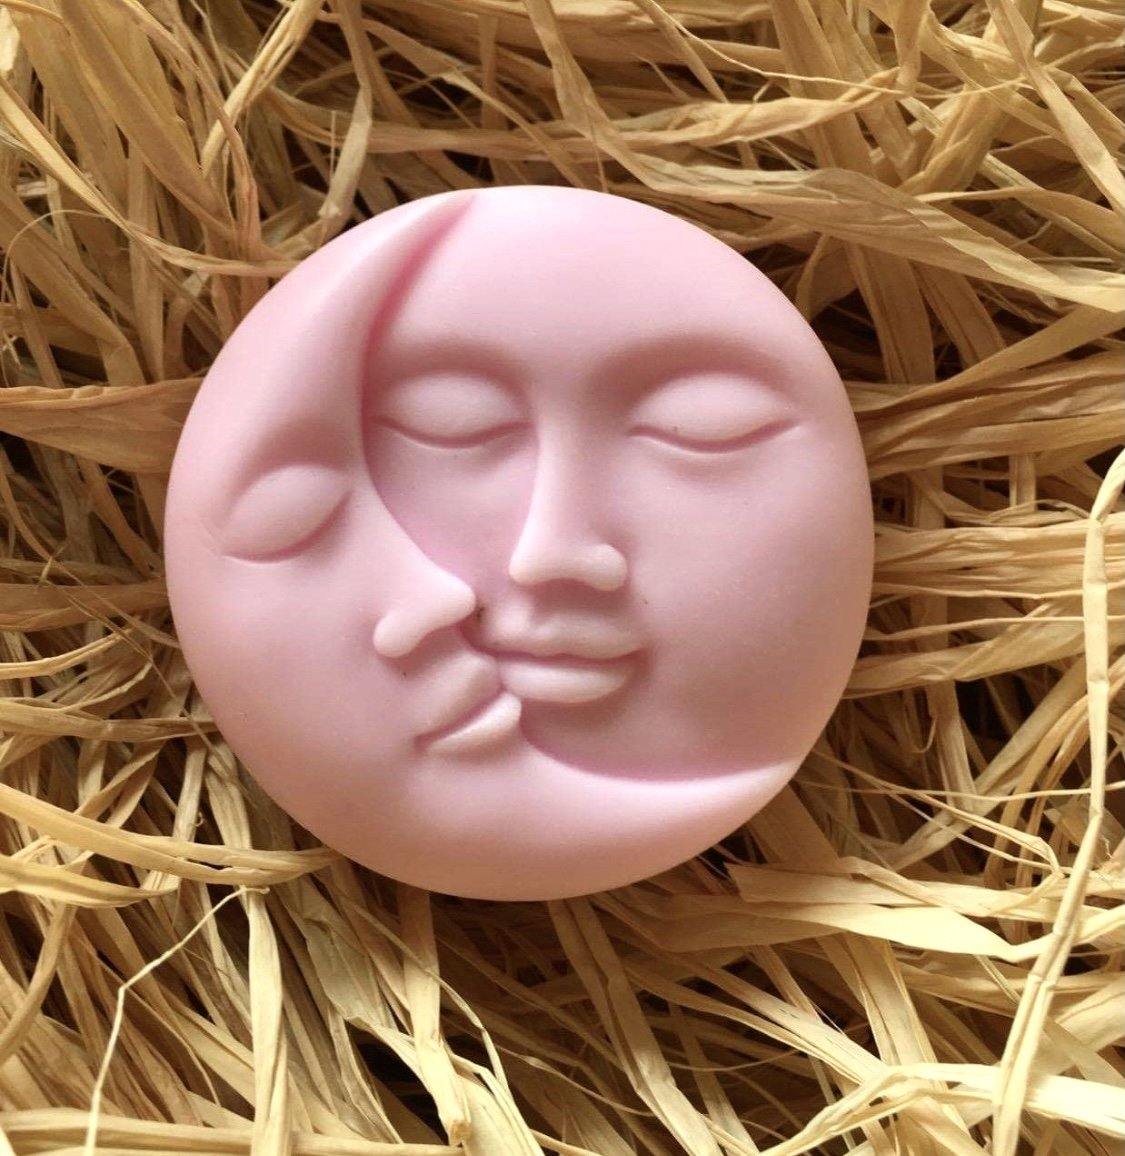 Acne Free Hydra Whipped Face/Body Soaps| Sun & Moon Bar Soaps | Art & Scents Afrique